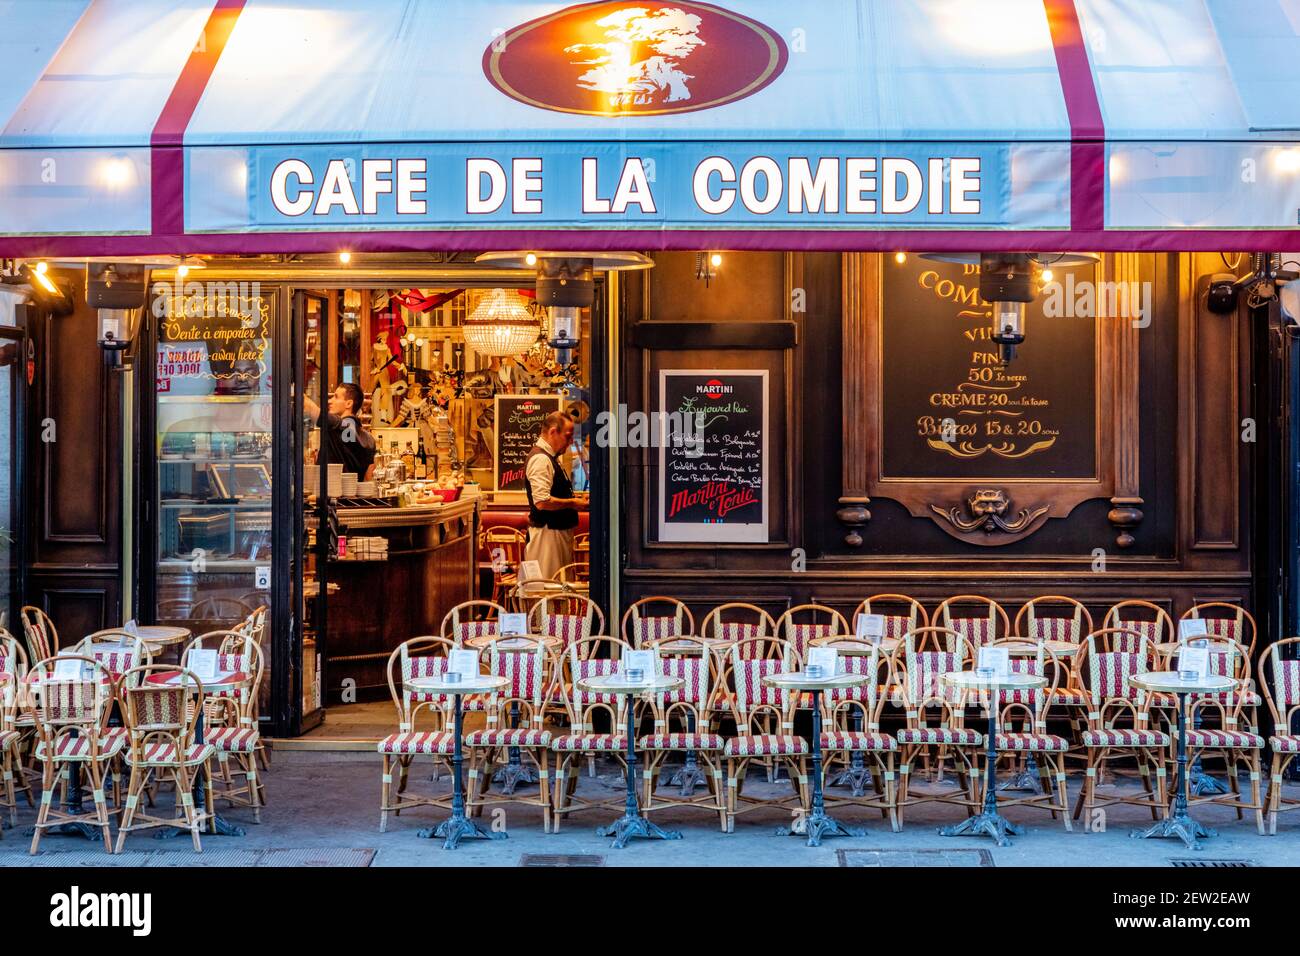 Cafe De La Comedie High Resolution Stock Photography and Images - Alamy